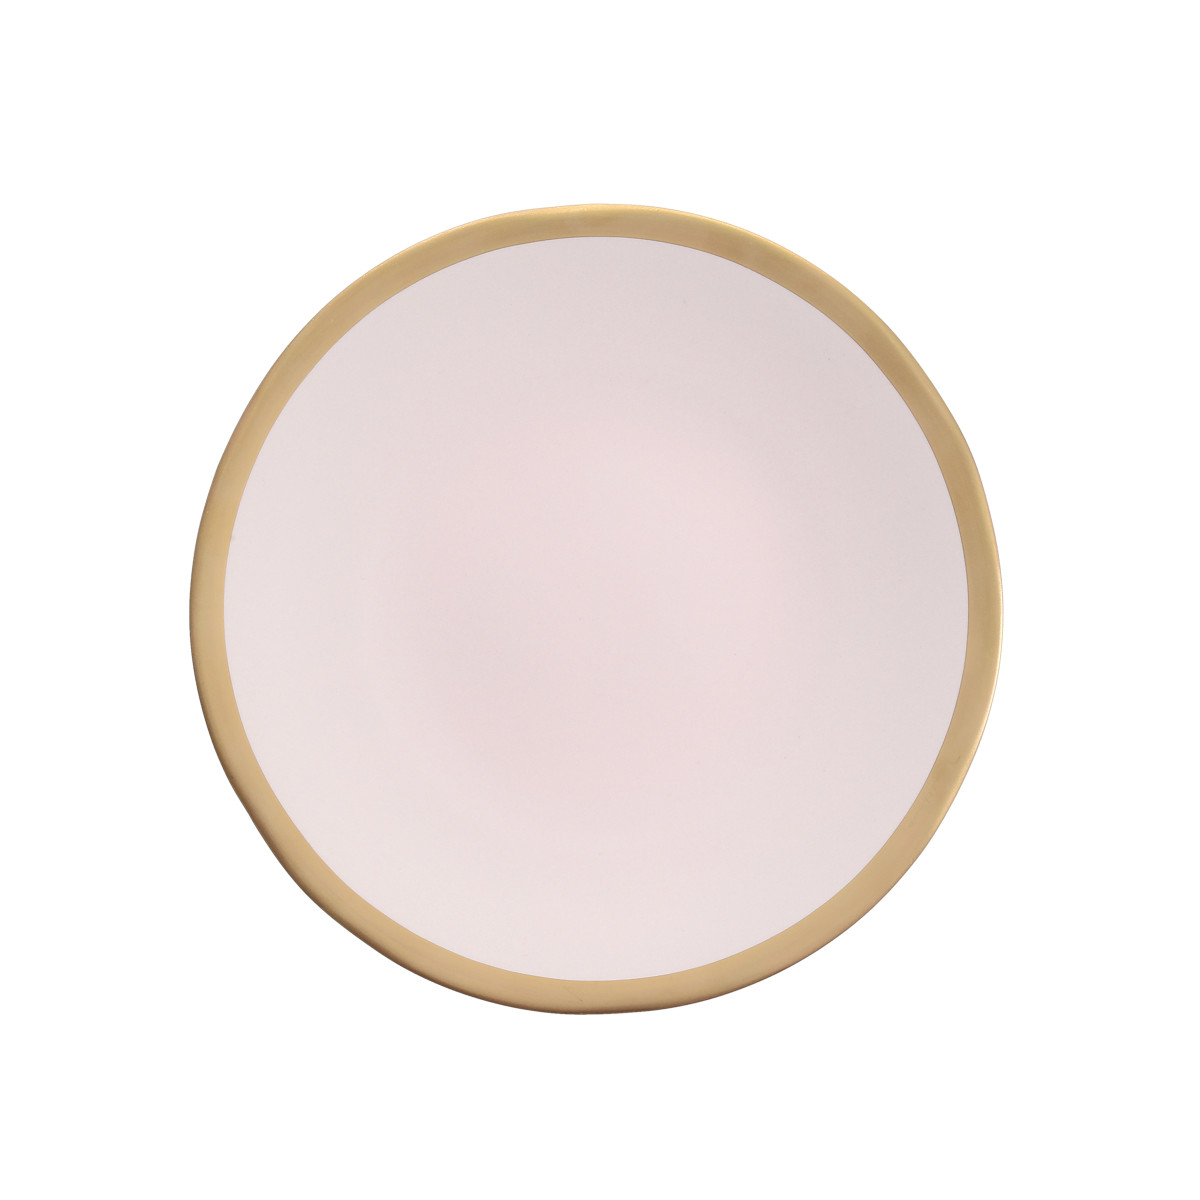 Heirloom Gold Band Blush Show Plate 12"